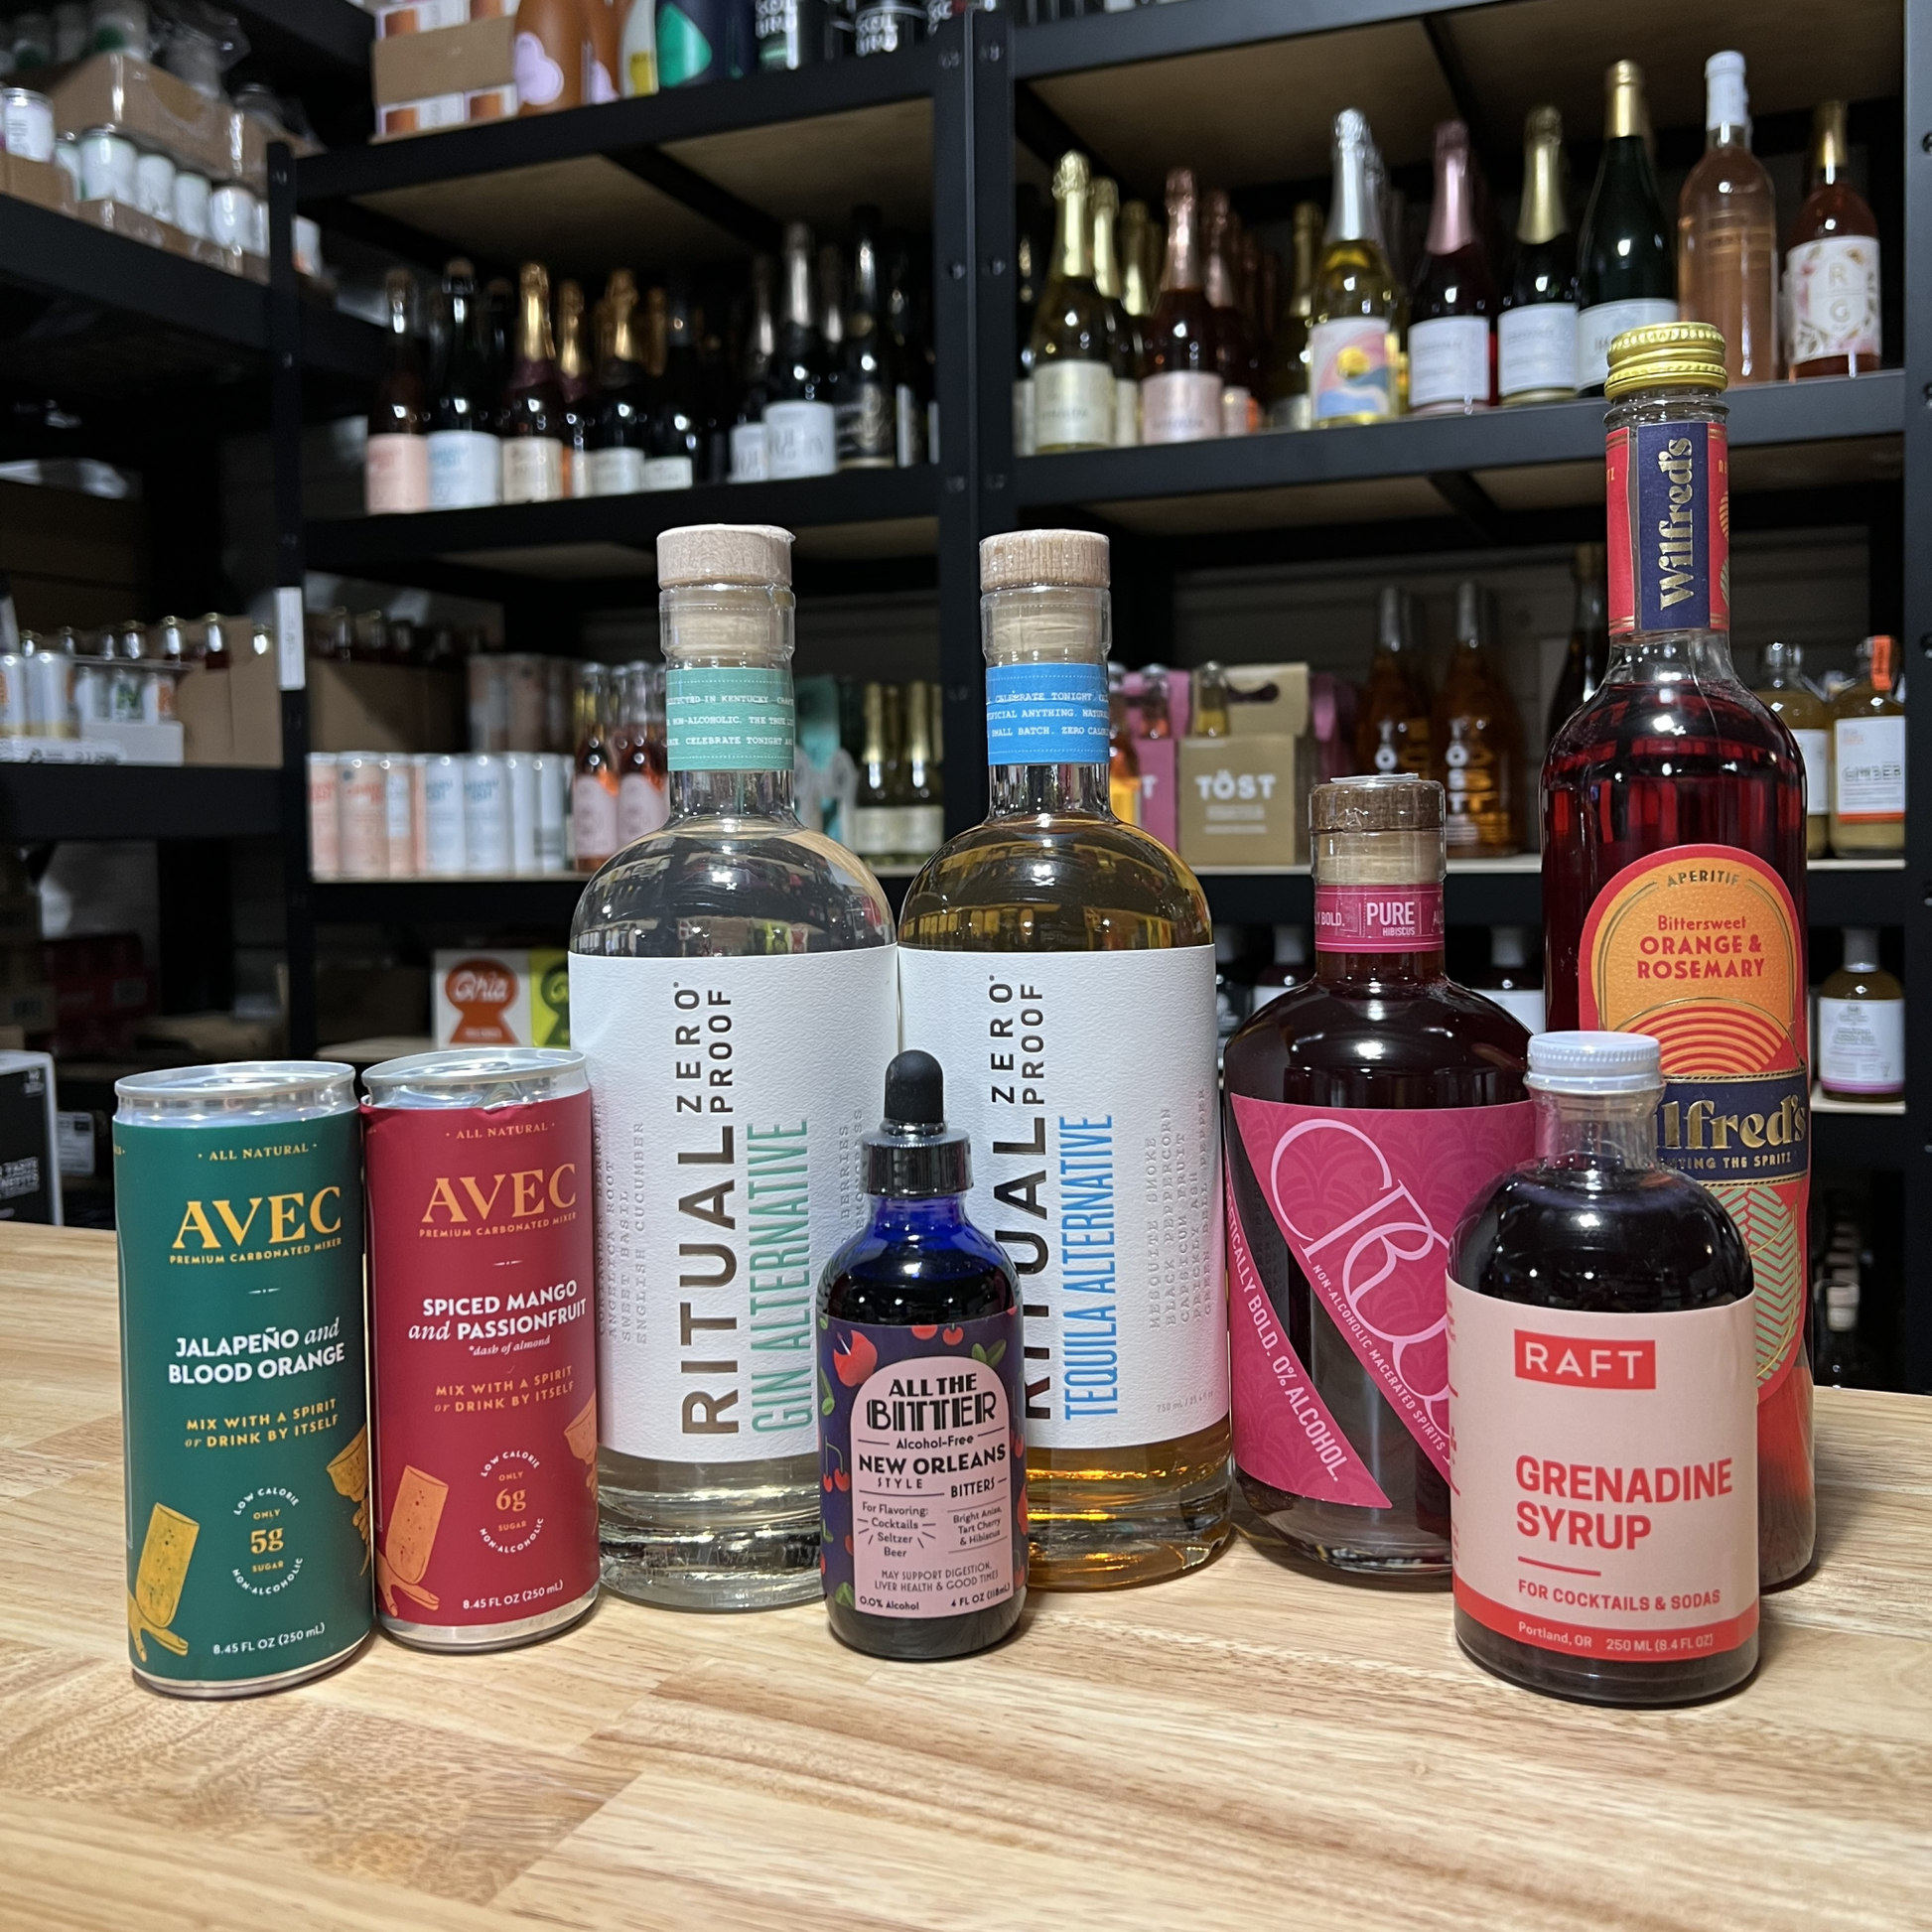 Dry January Mixology Sale - start your non-alcoholic bar with this bundle - make great alcohol free cocktails to impress anyone - AVEC, all the bitter, raft syrup, wilfred's, crossip, ritual zero proof spirits